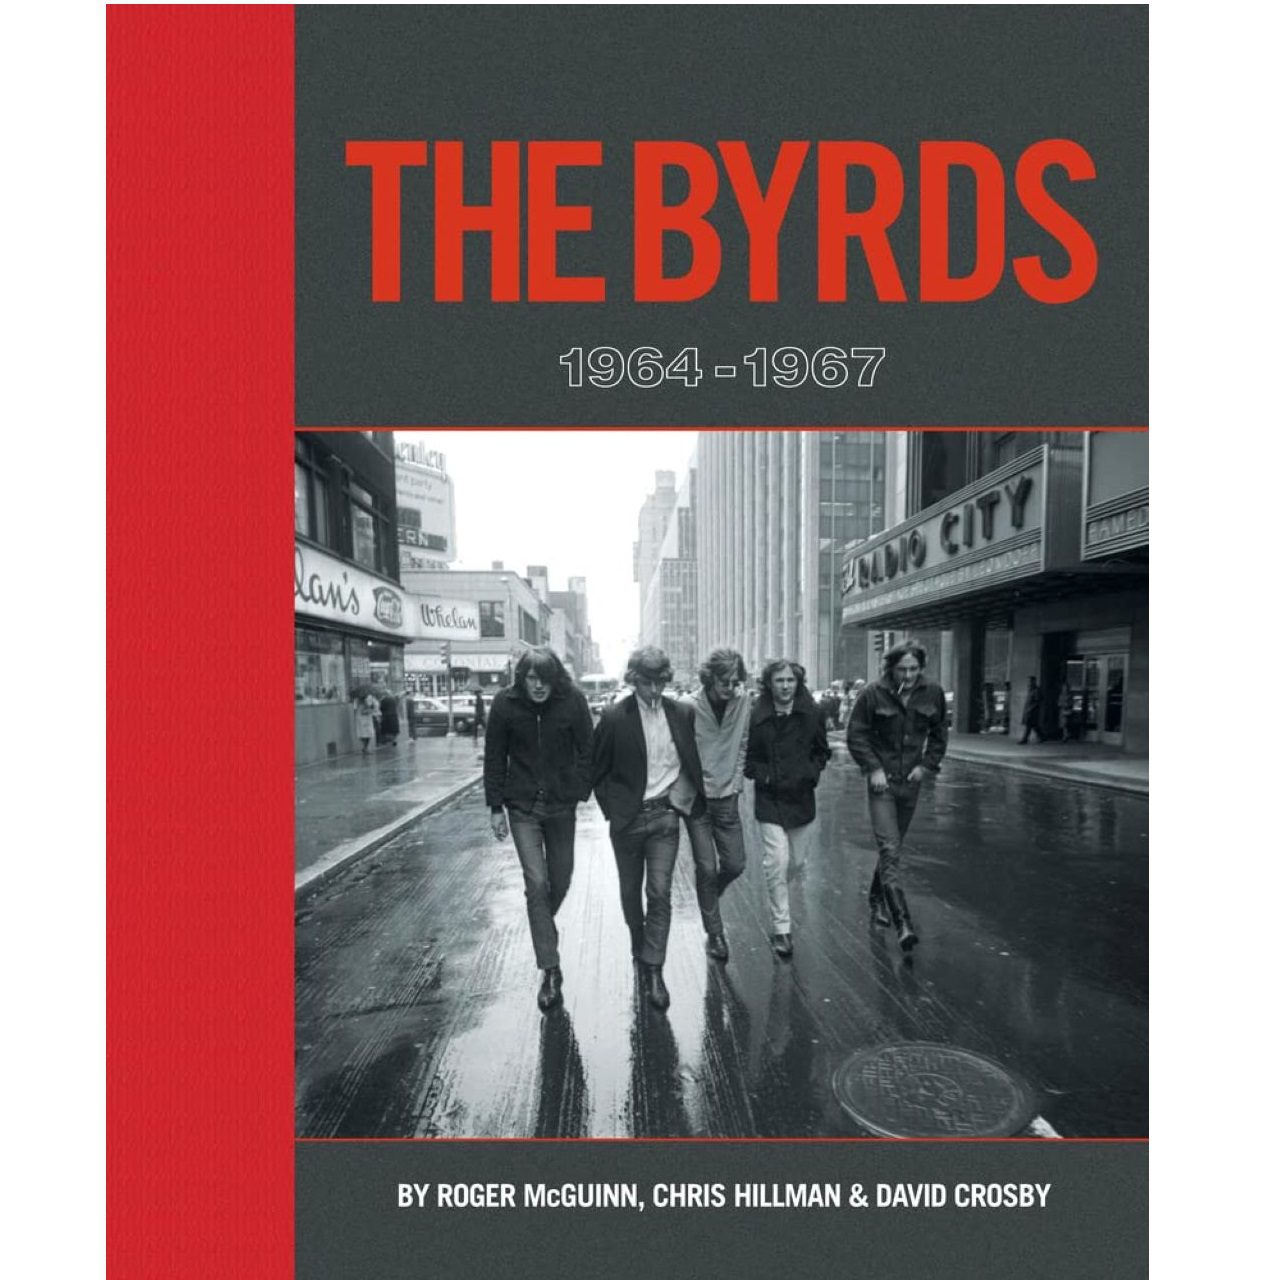 The Byrds 1964-1967 (BMG) cover book